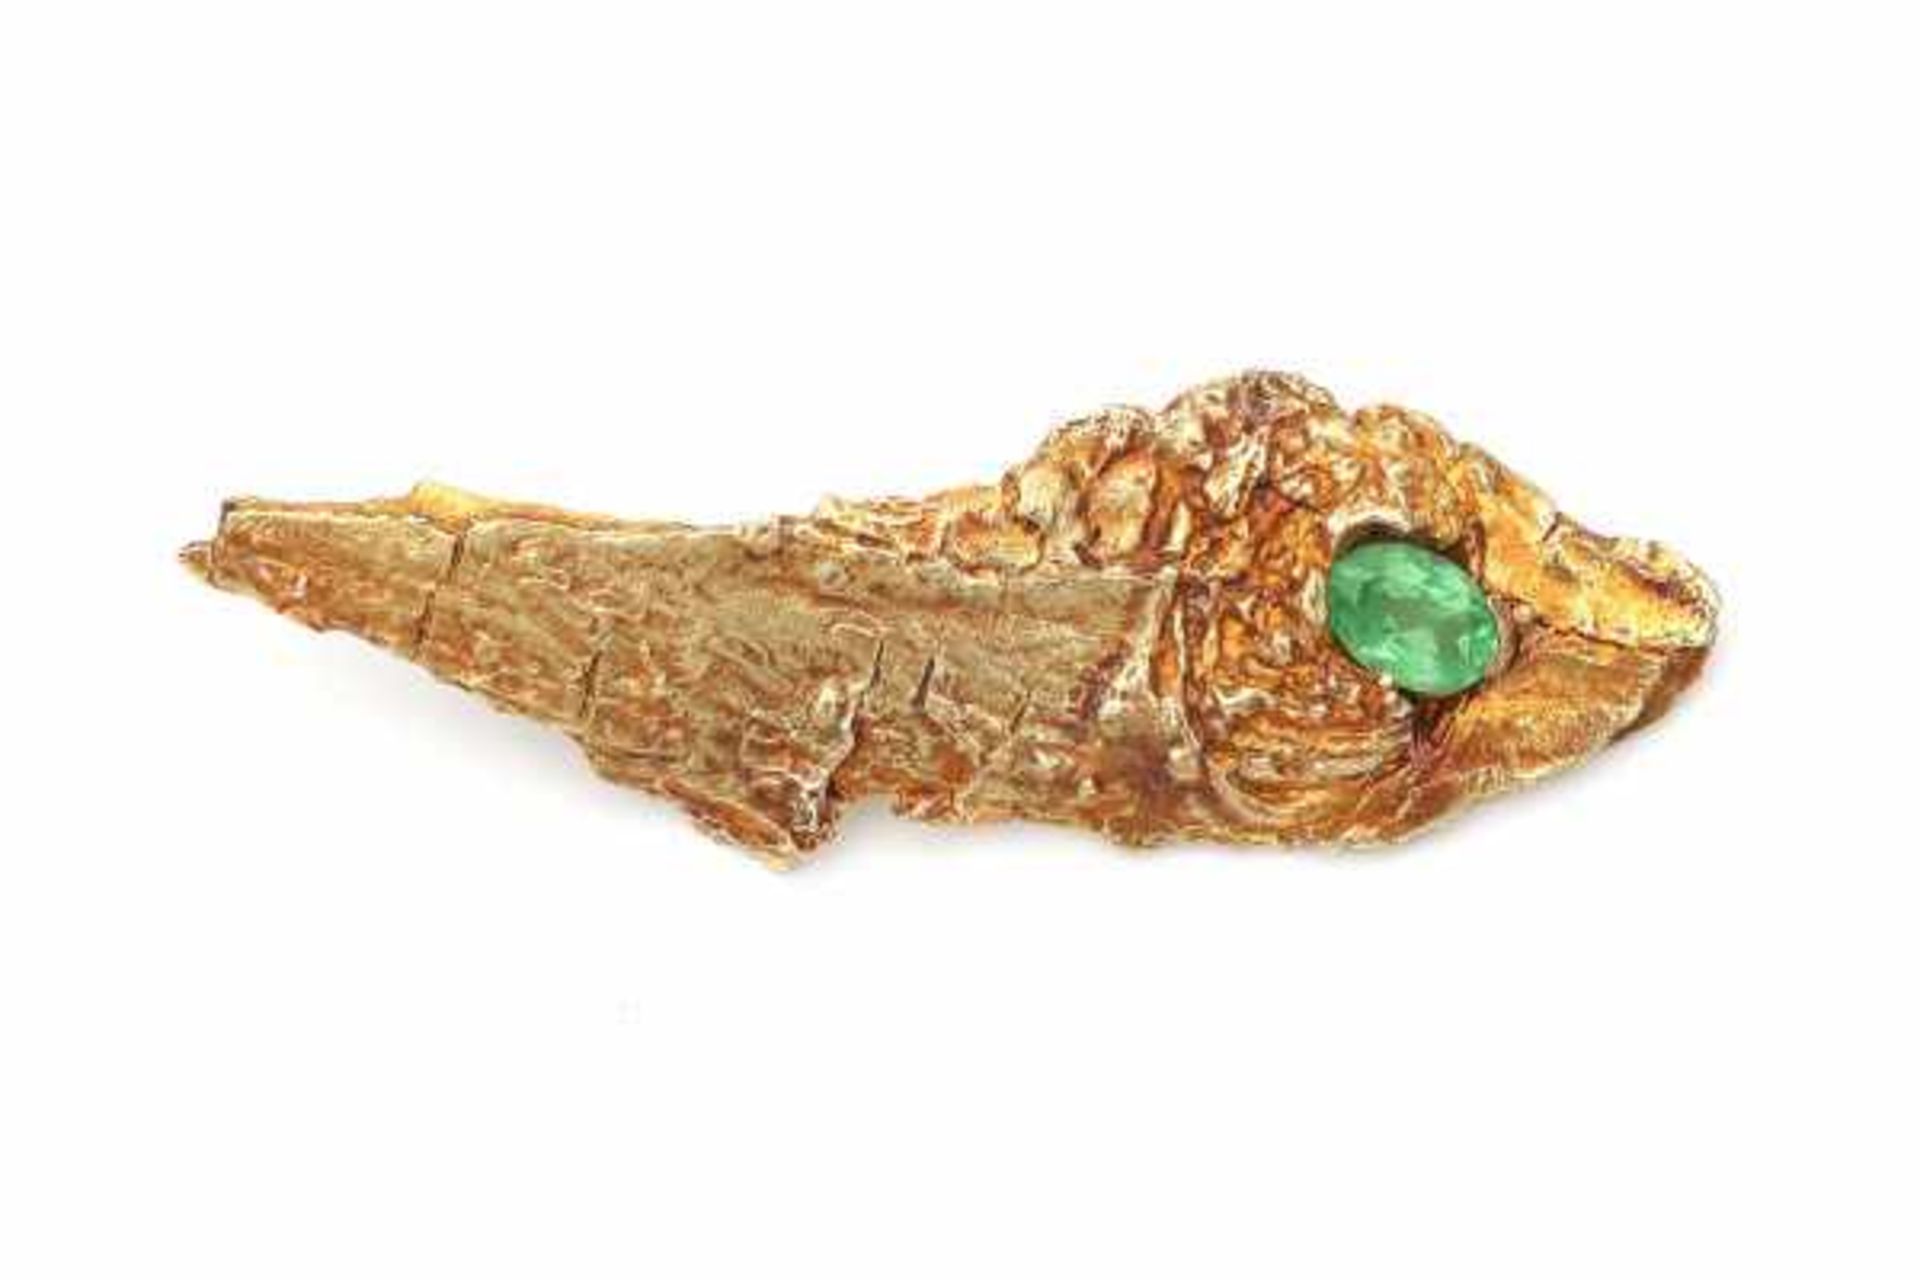 A 14 carat yellow gold brooch of brutalist design. Set with an oval facetted green tsavorite